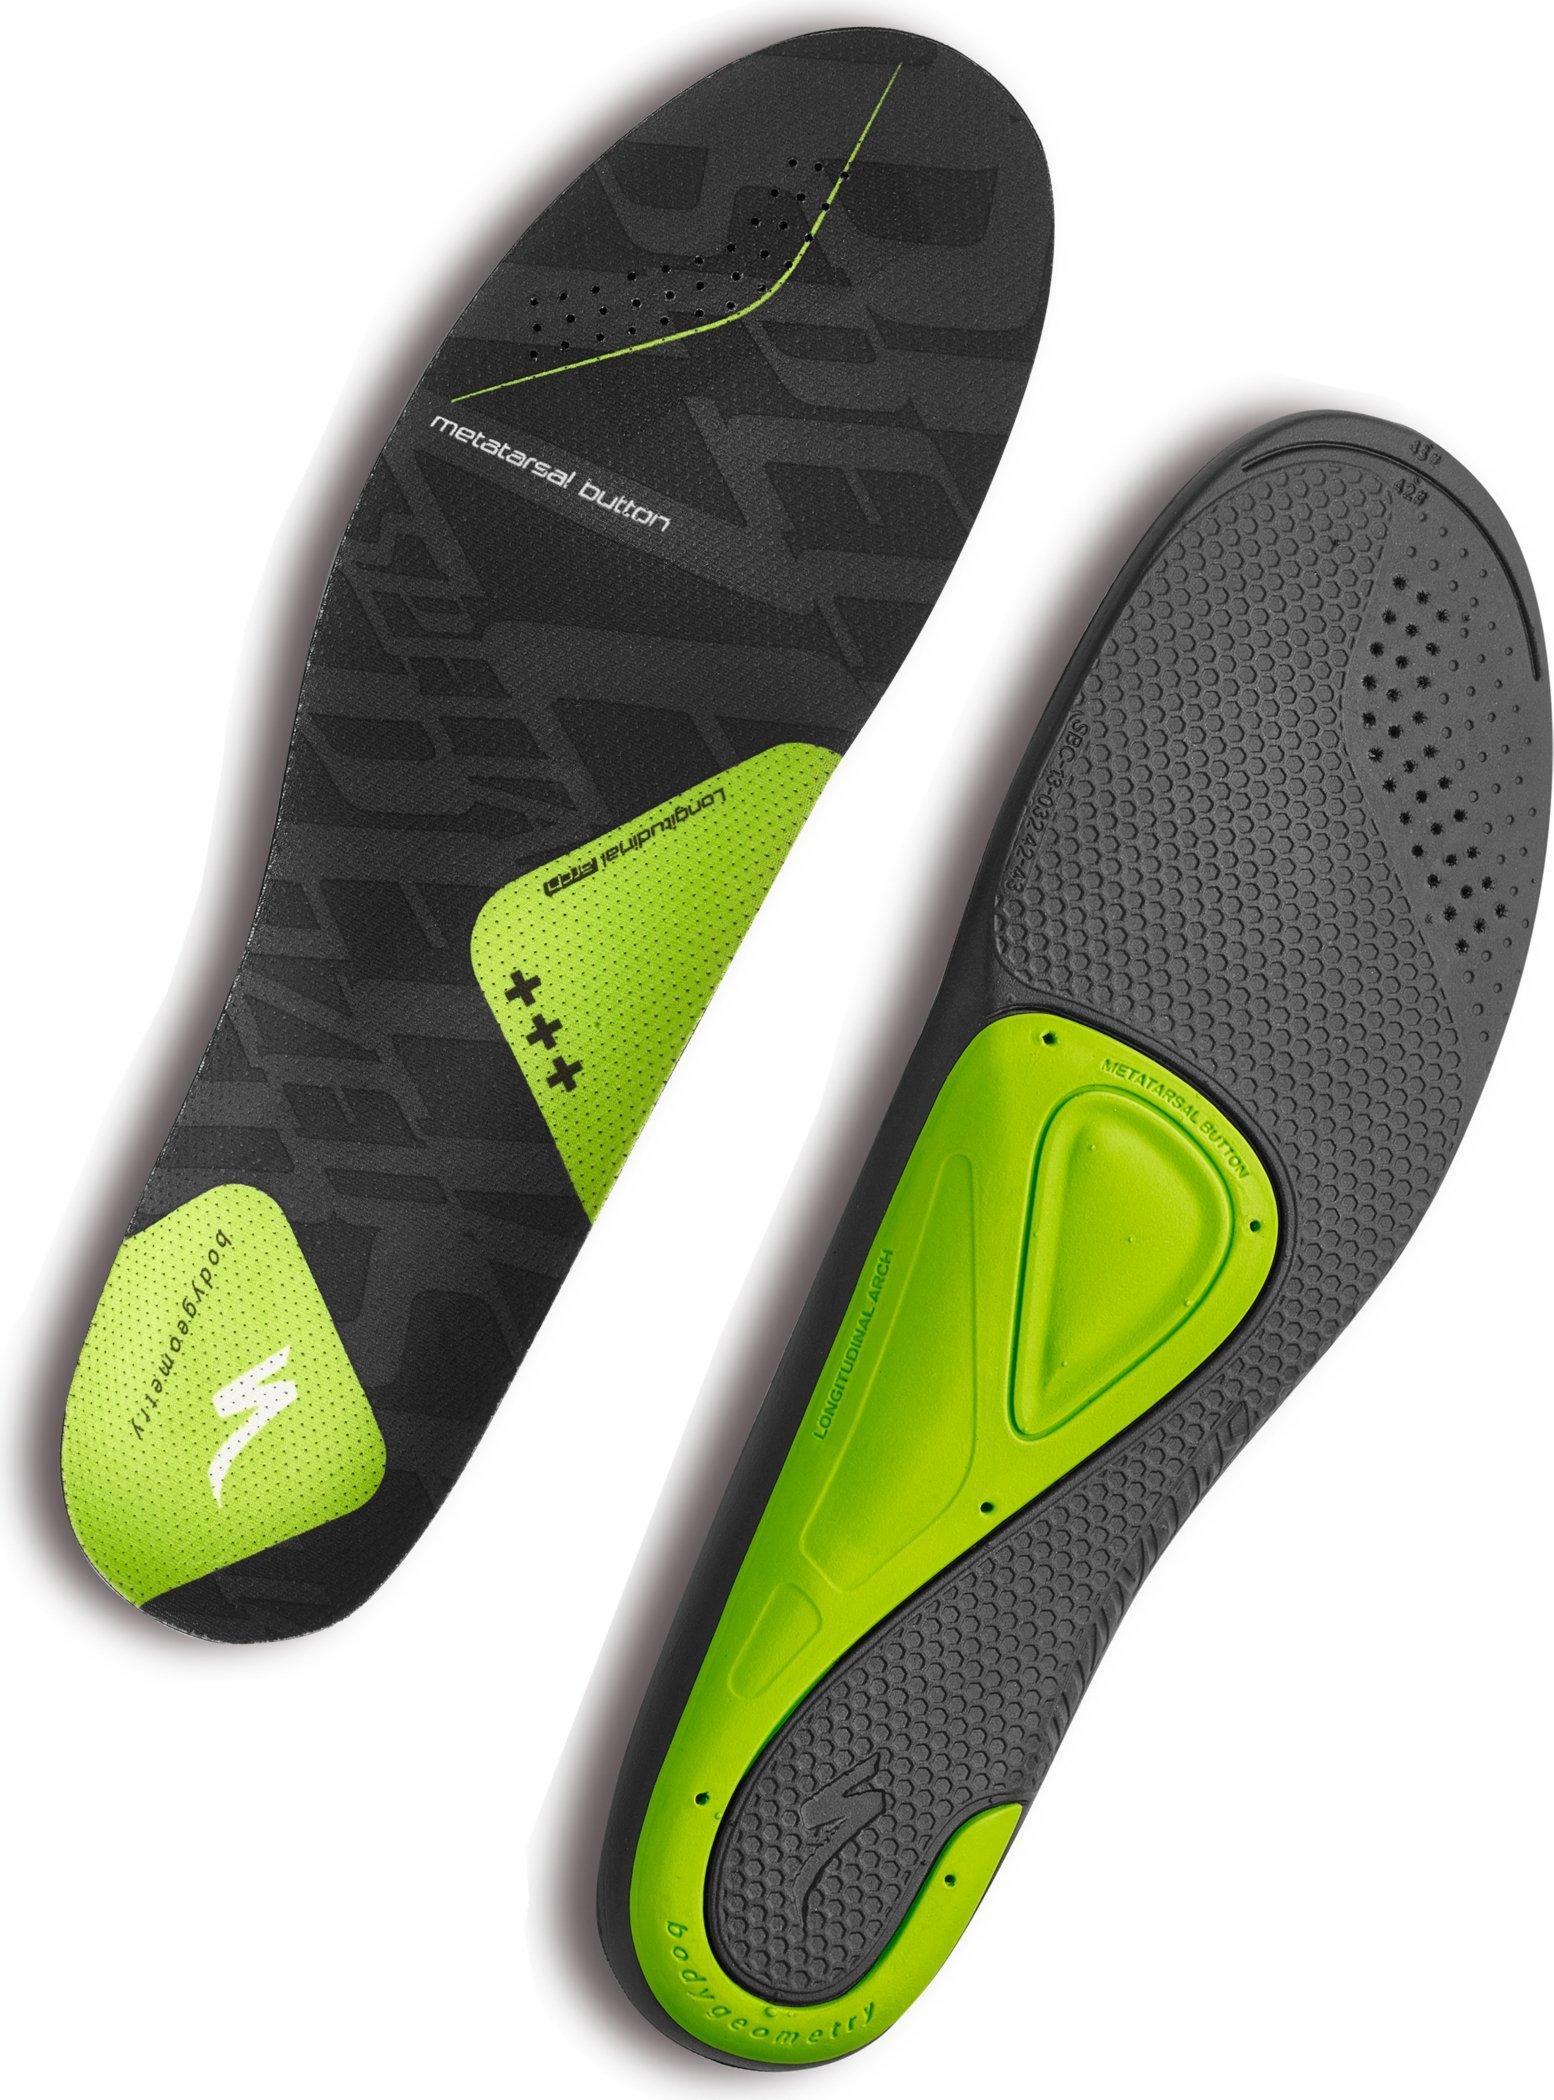 Details about   Specialized Body Geometry Cycling Shoe Footbeds Insoles Size 43 